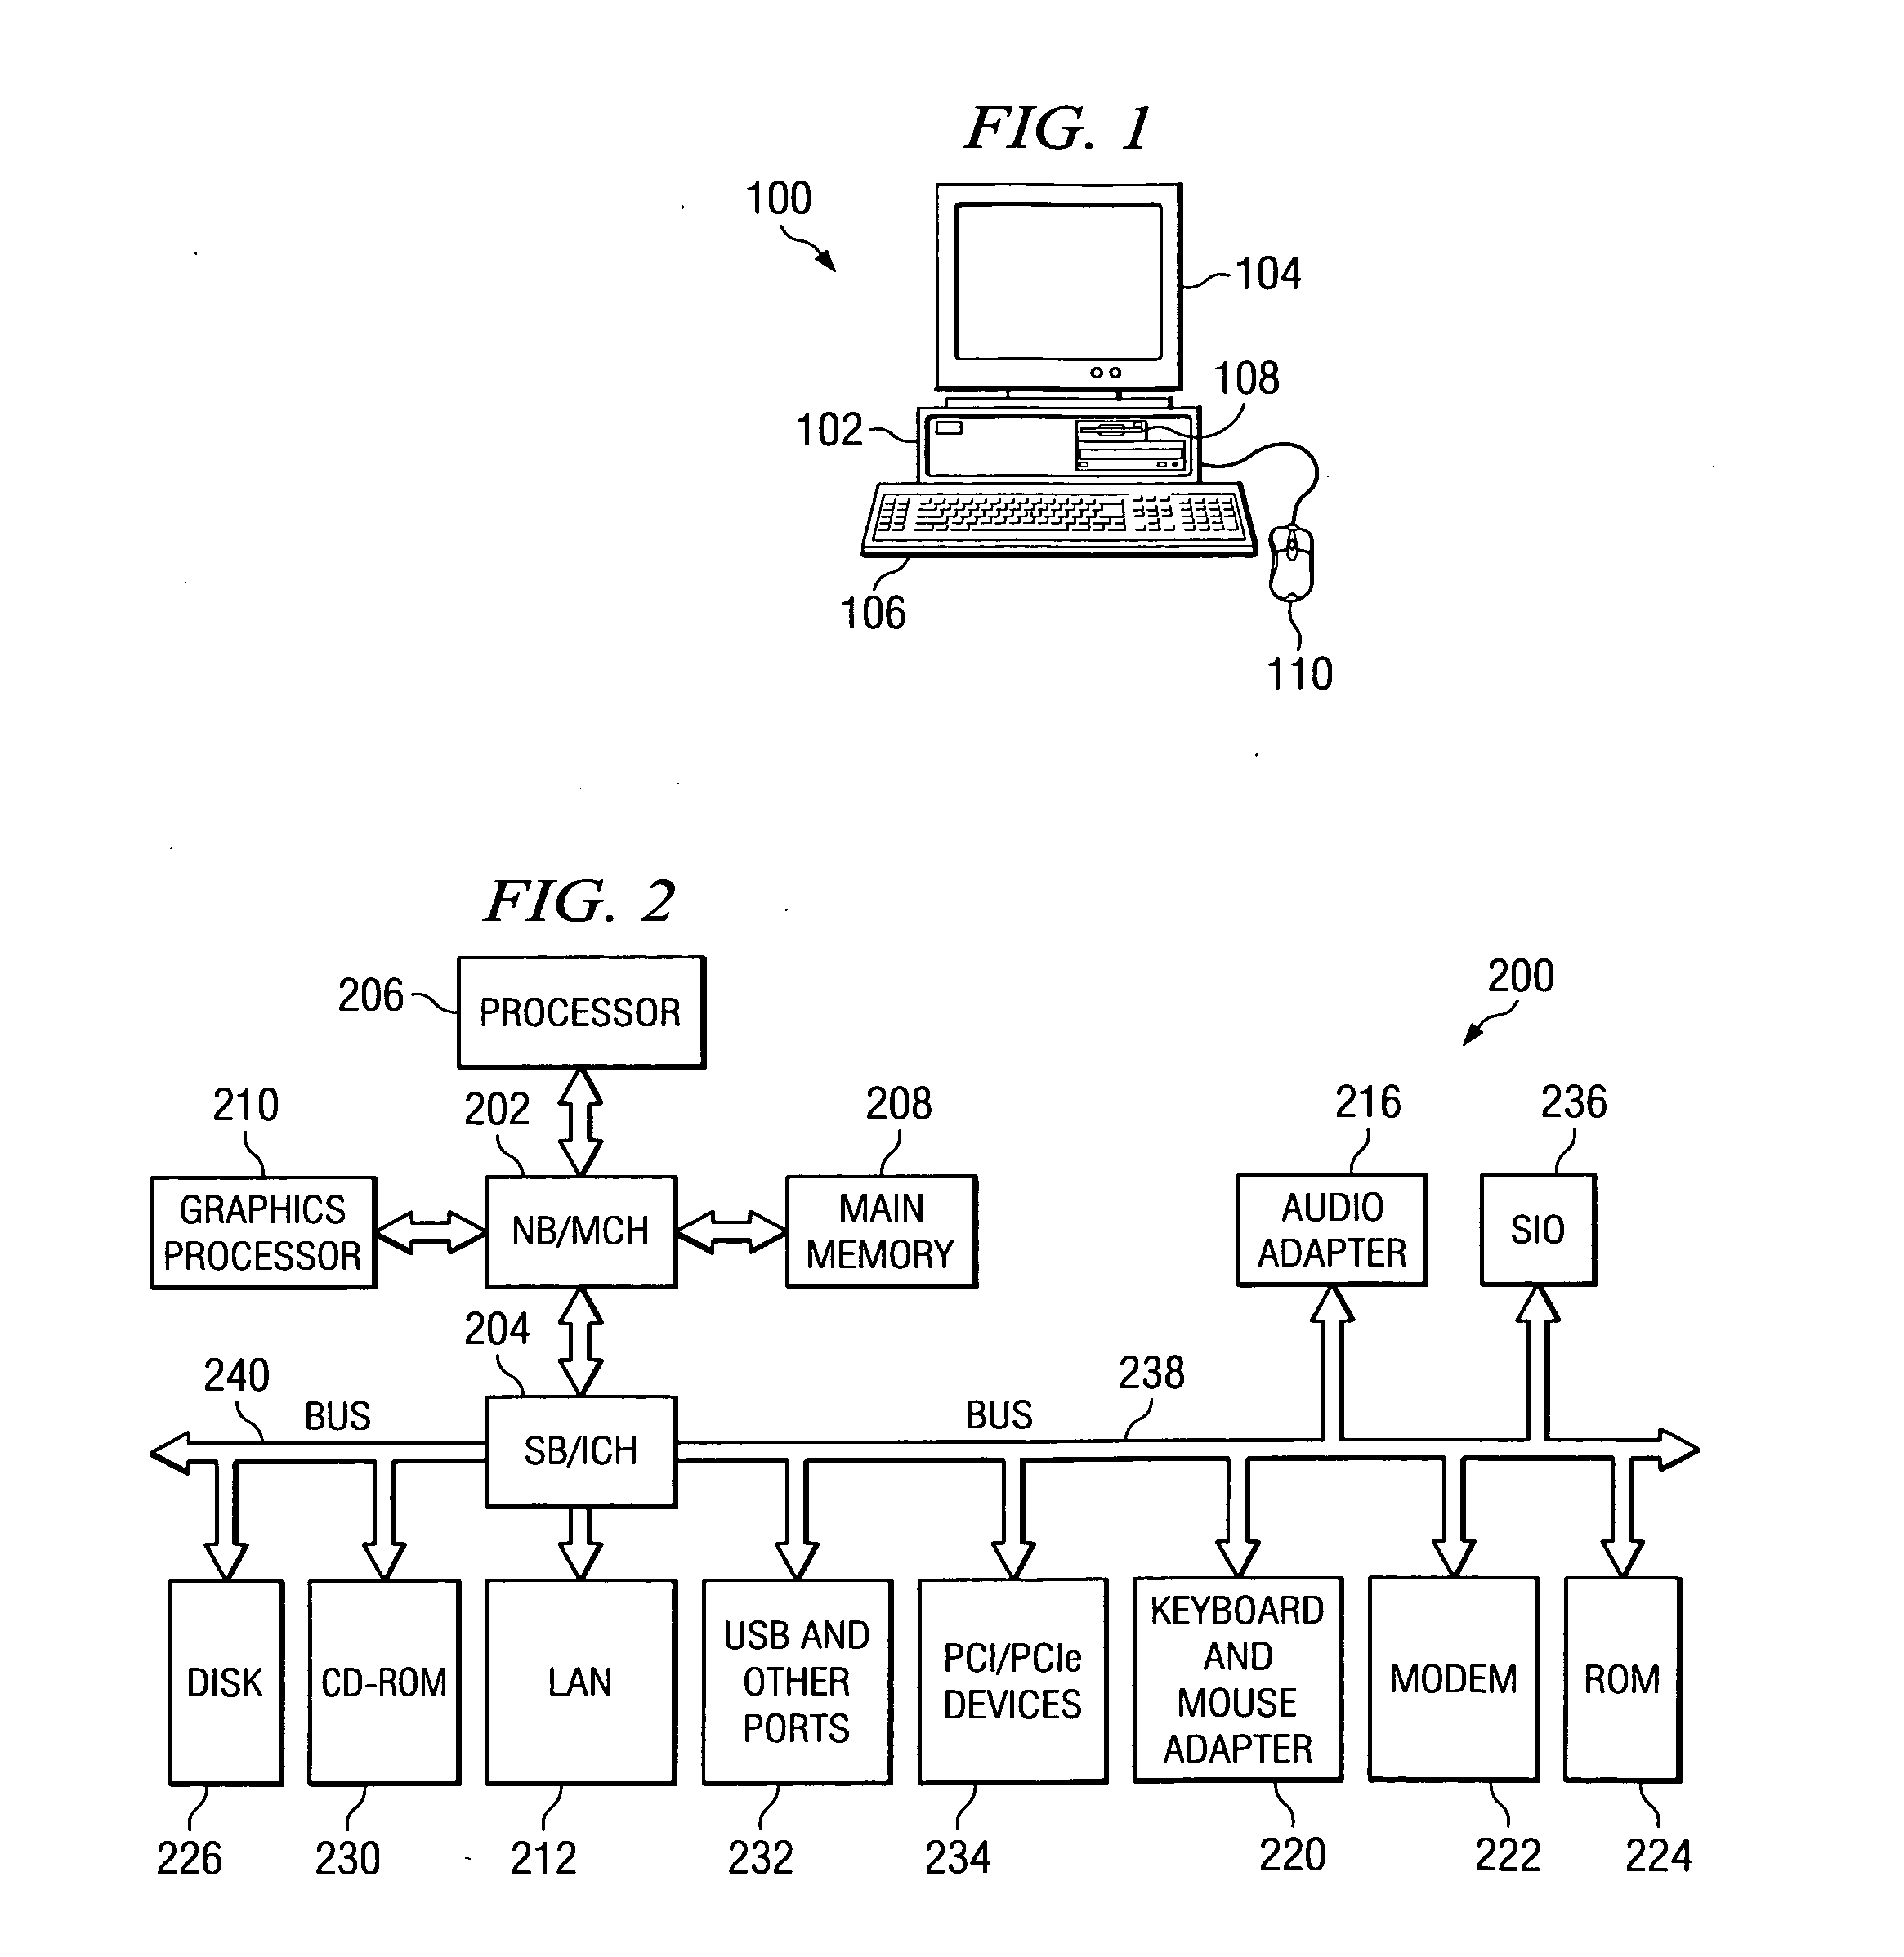 Method and apparatus for adjusting profiling rates on systems with variable processor frequencies